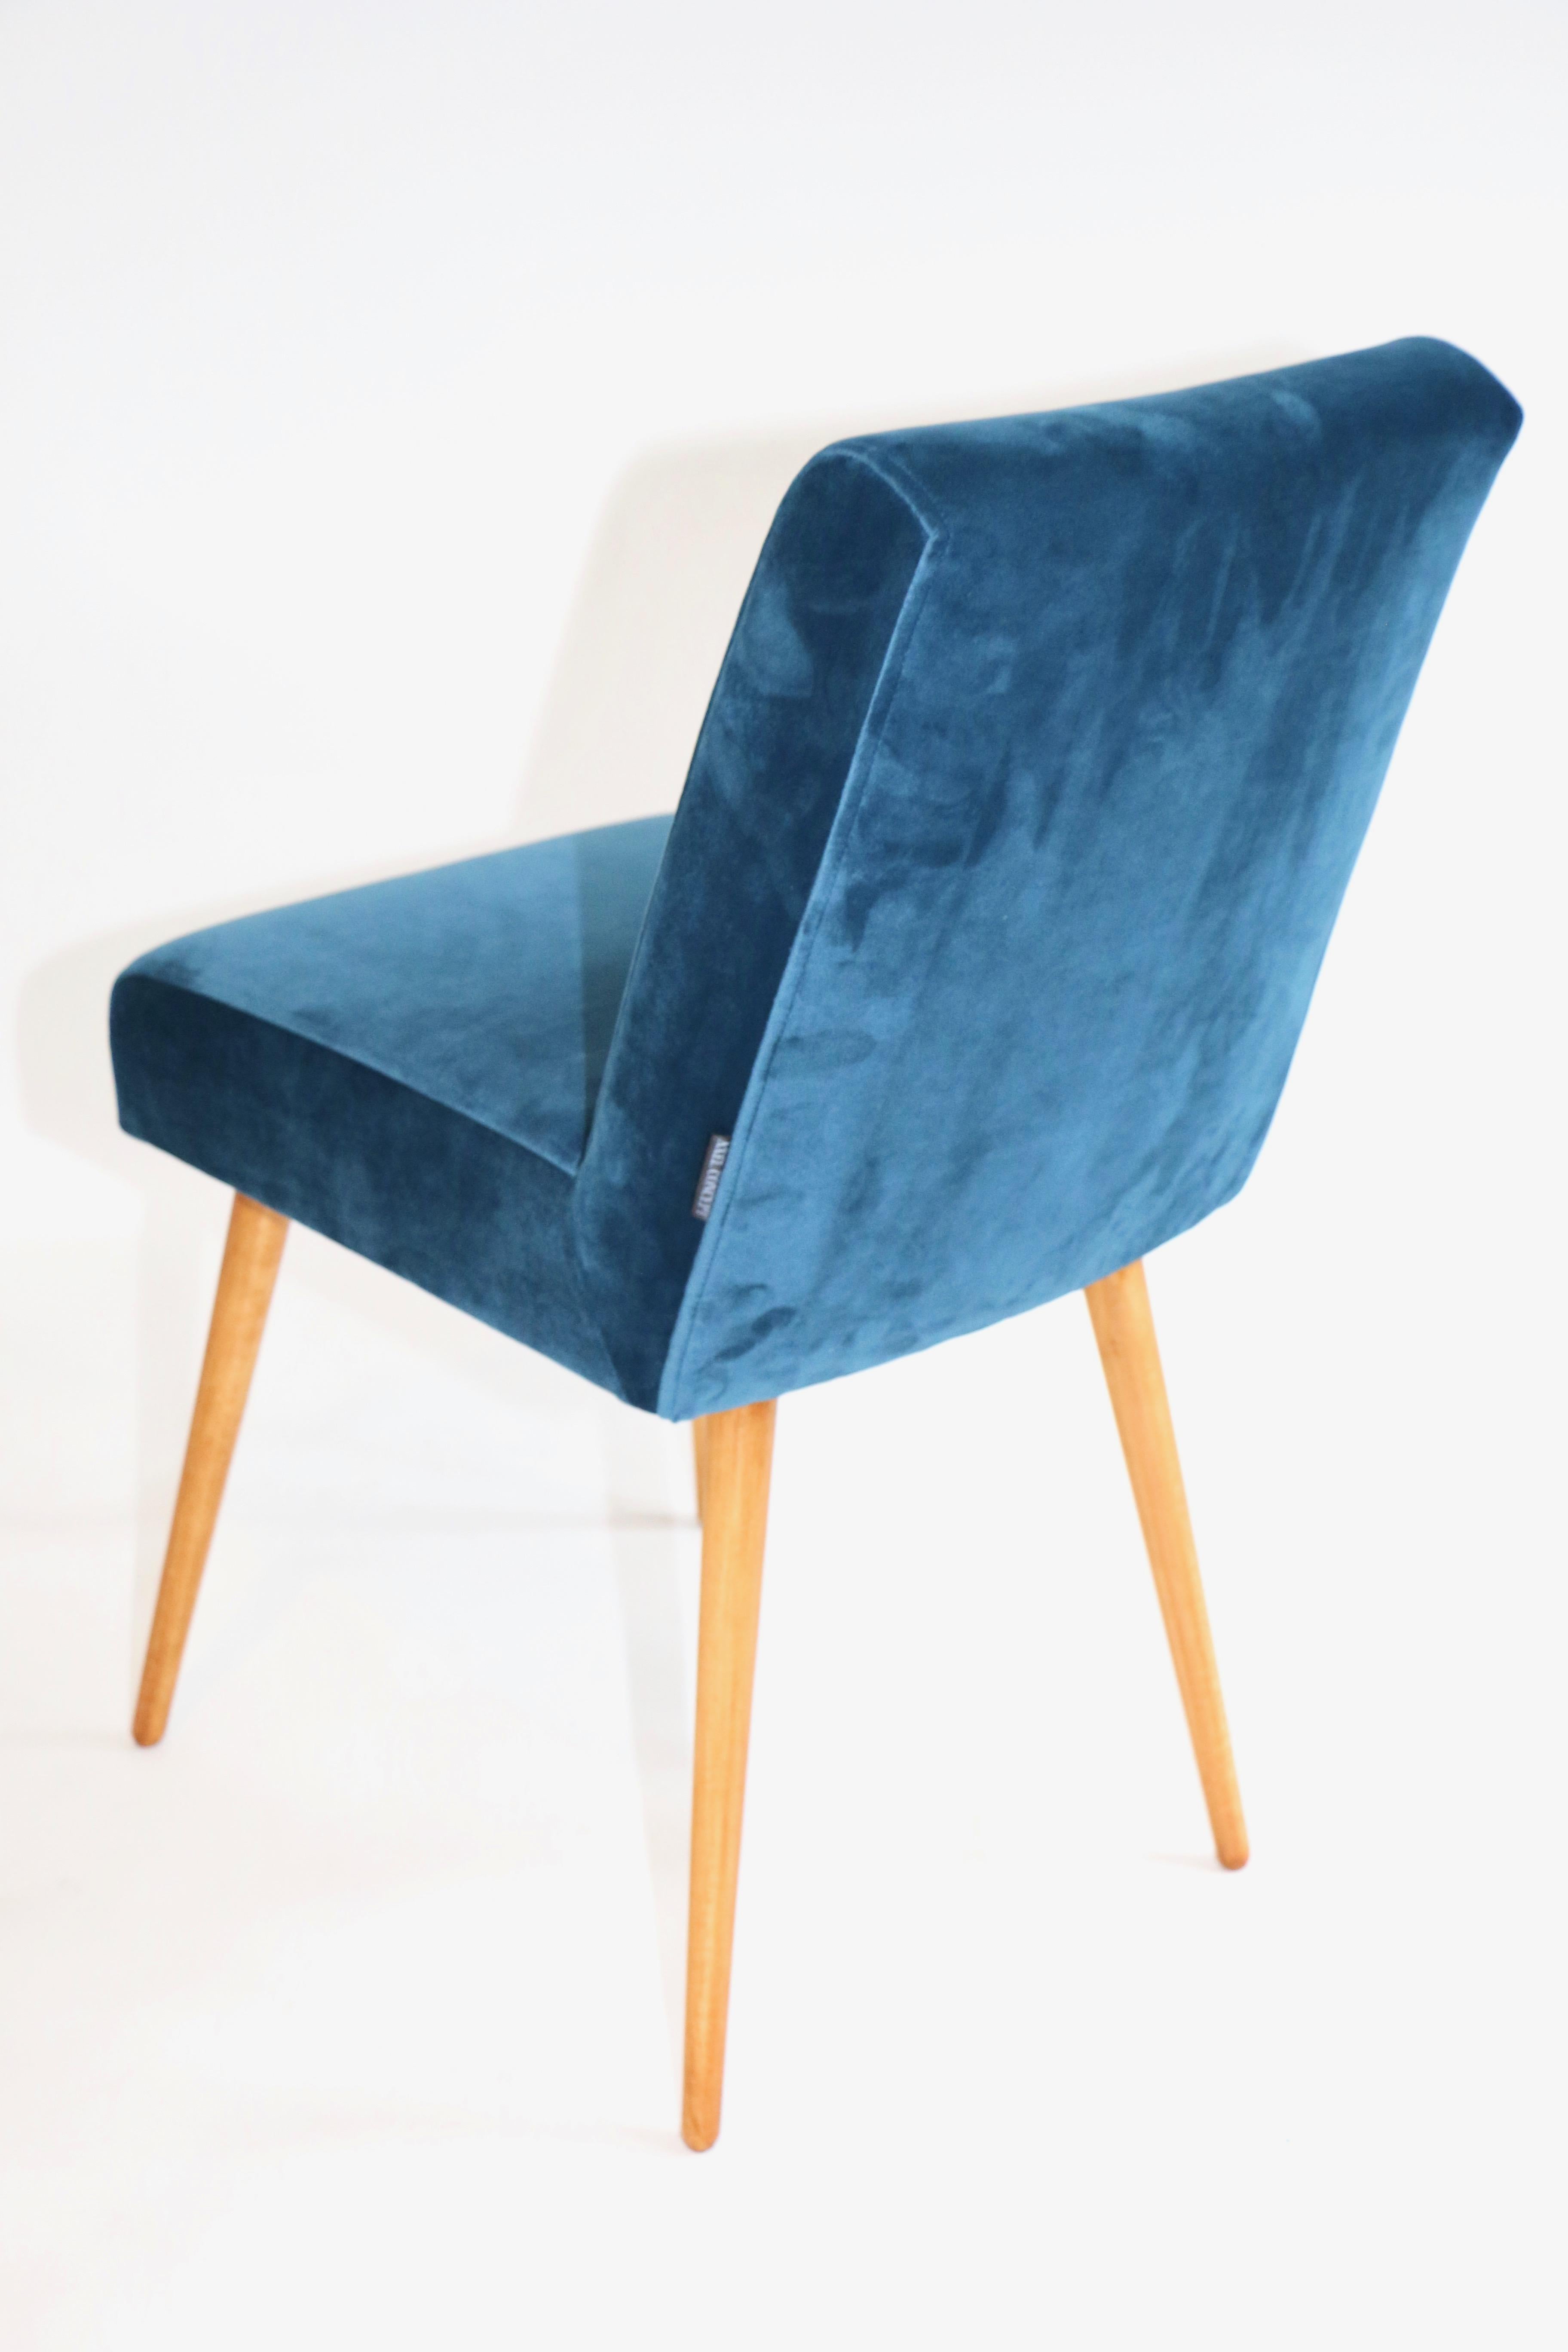 Set of Two Blue Marine Chairs in Velvet For Sale 1